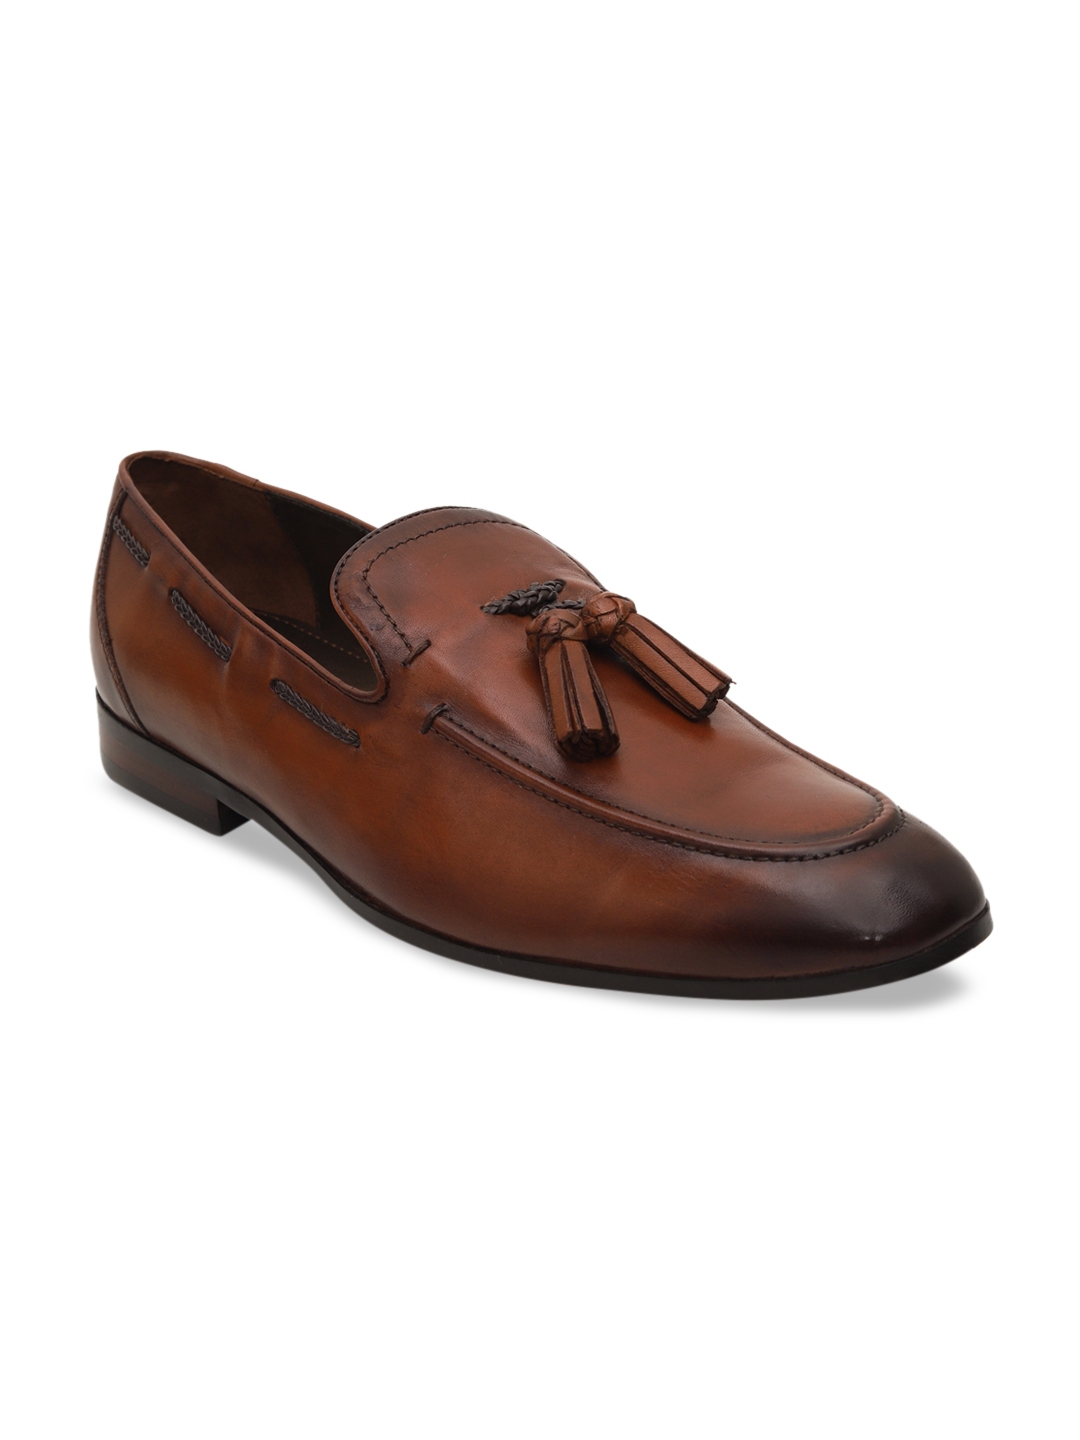 Buy ROSSO BRUNELLO Men Tan Brown Solid Leather Formal Loafers - Formal ...